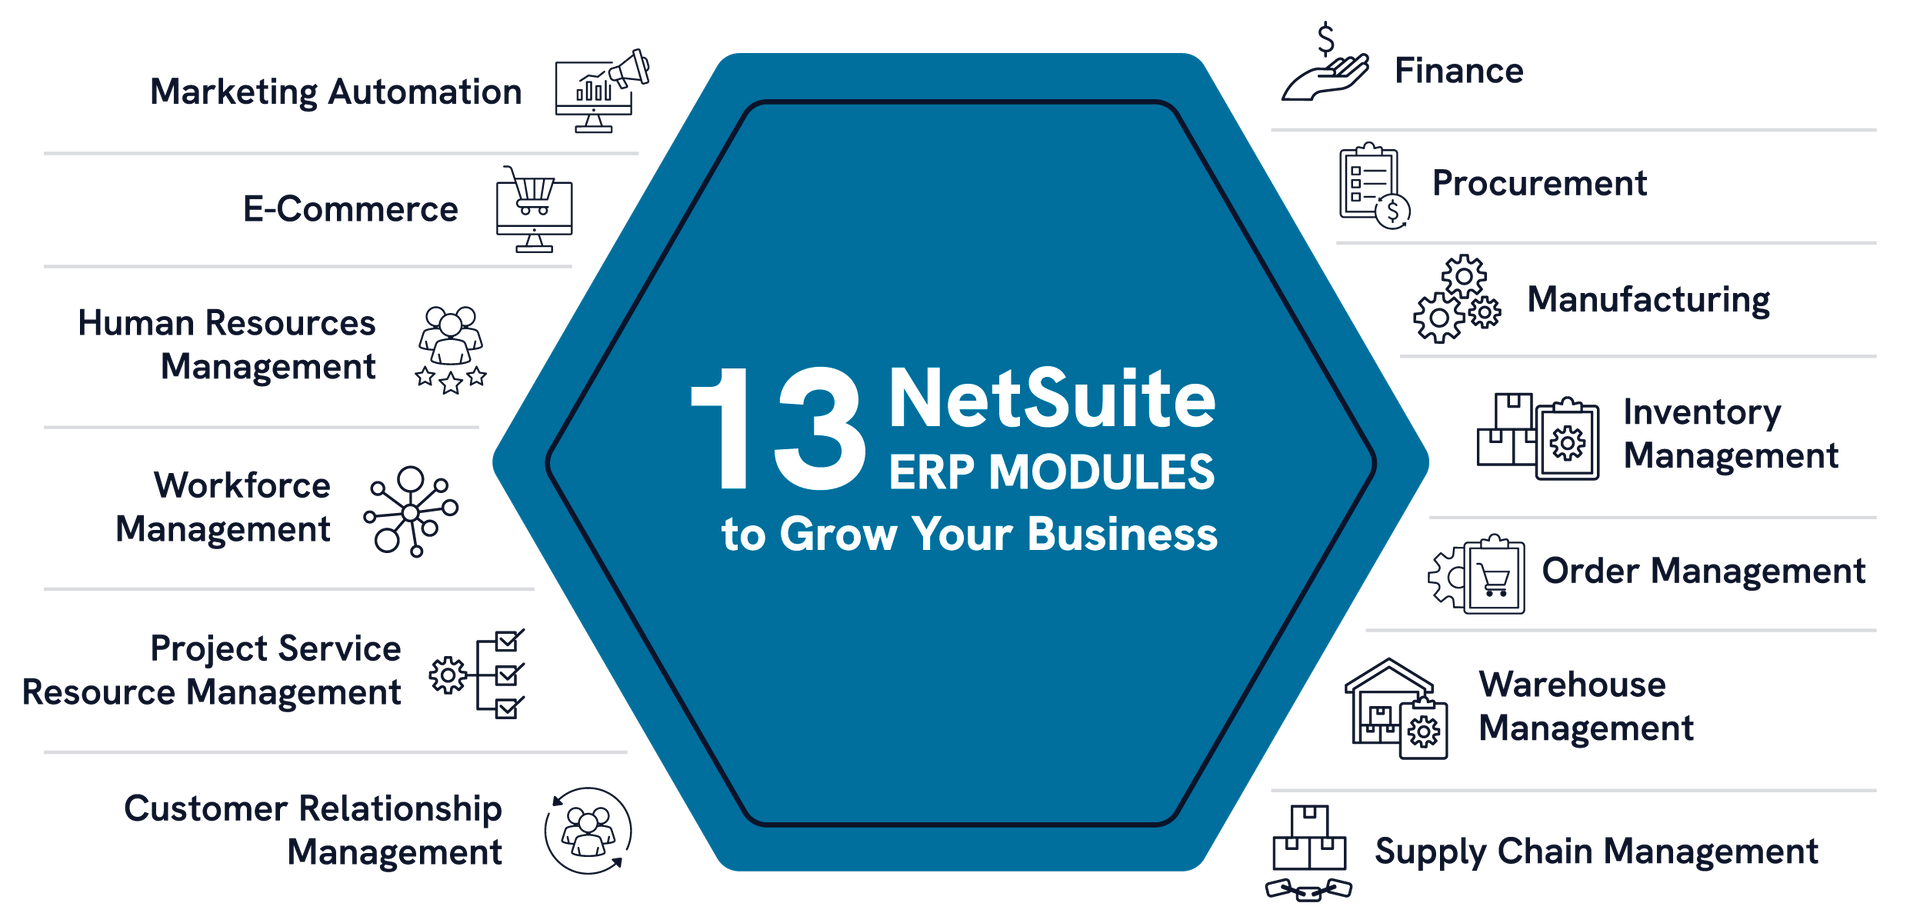 NetSuite Modules by SuiteDynamics